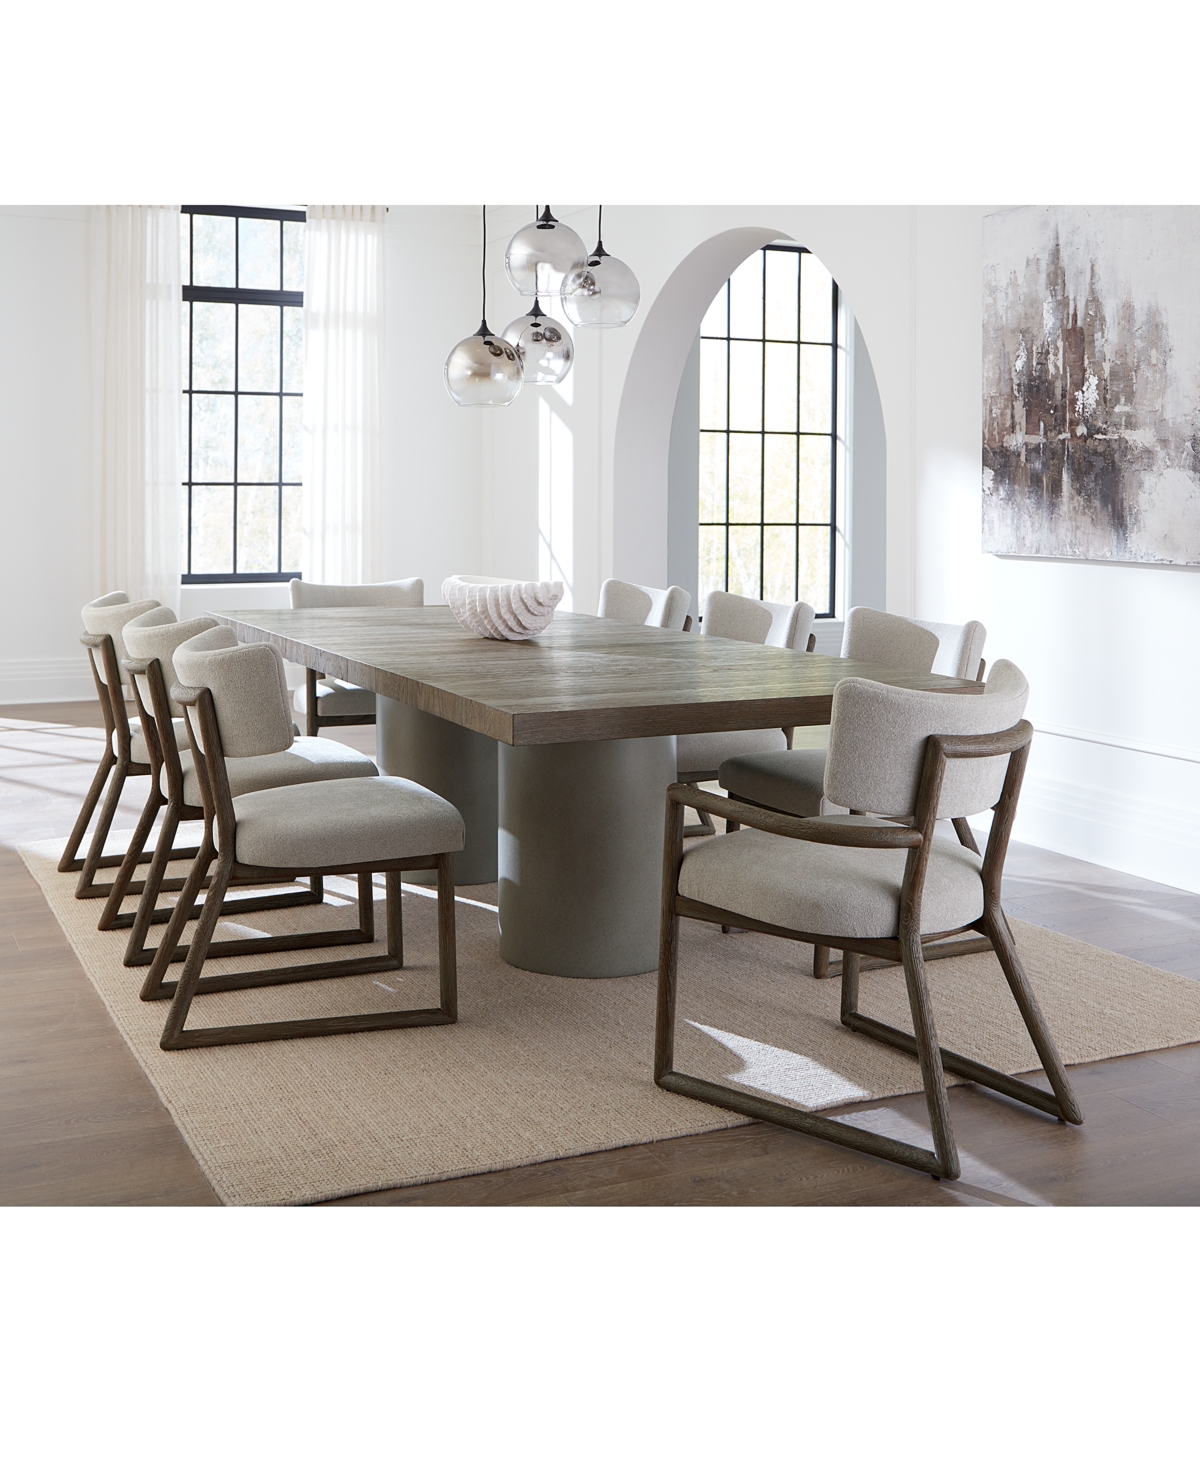 Bernhardt Fantasia 9pc Dining Set (table + 6 Side Chairs + 2 Arm Chairs) In No Color